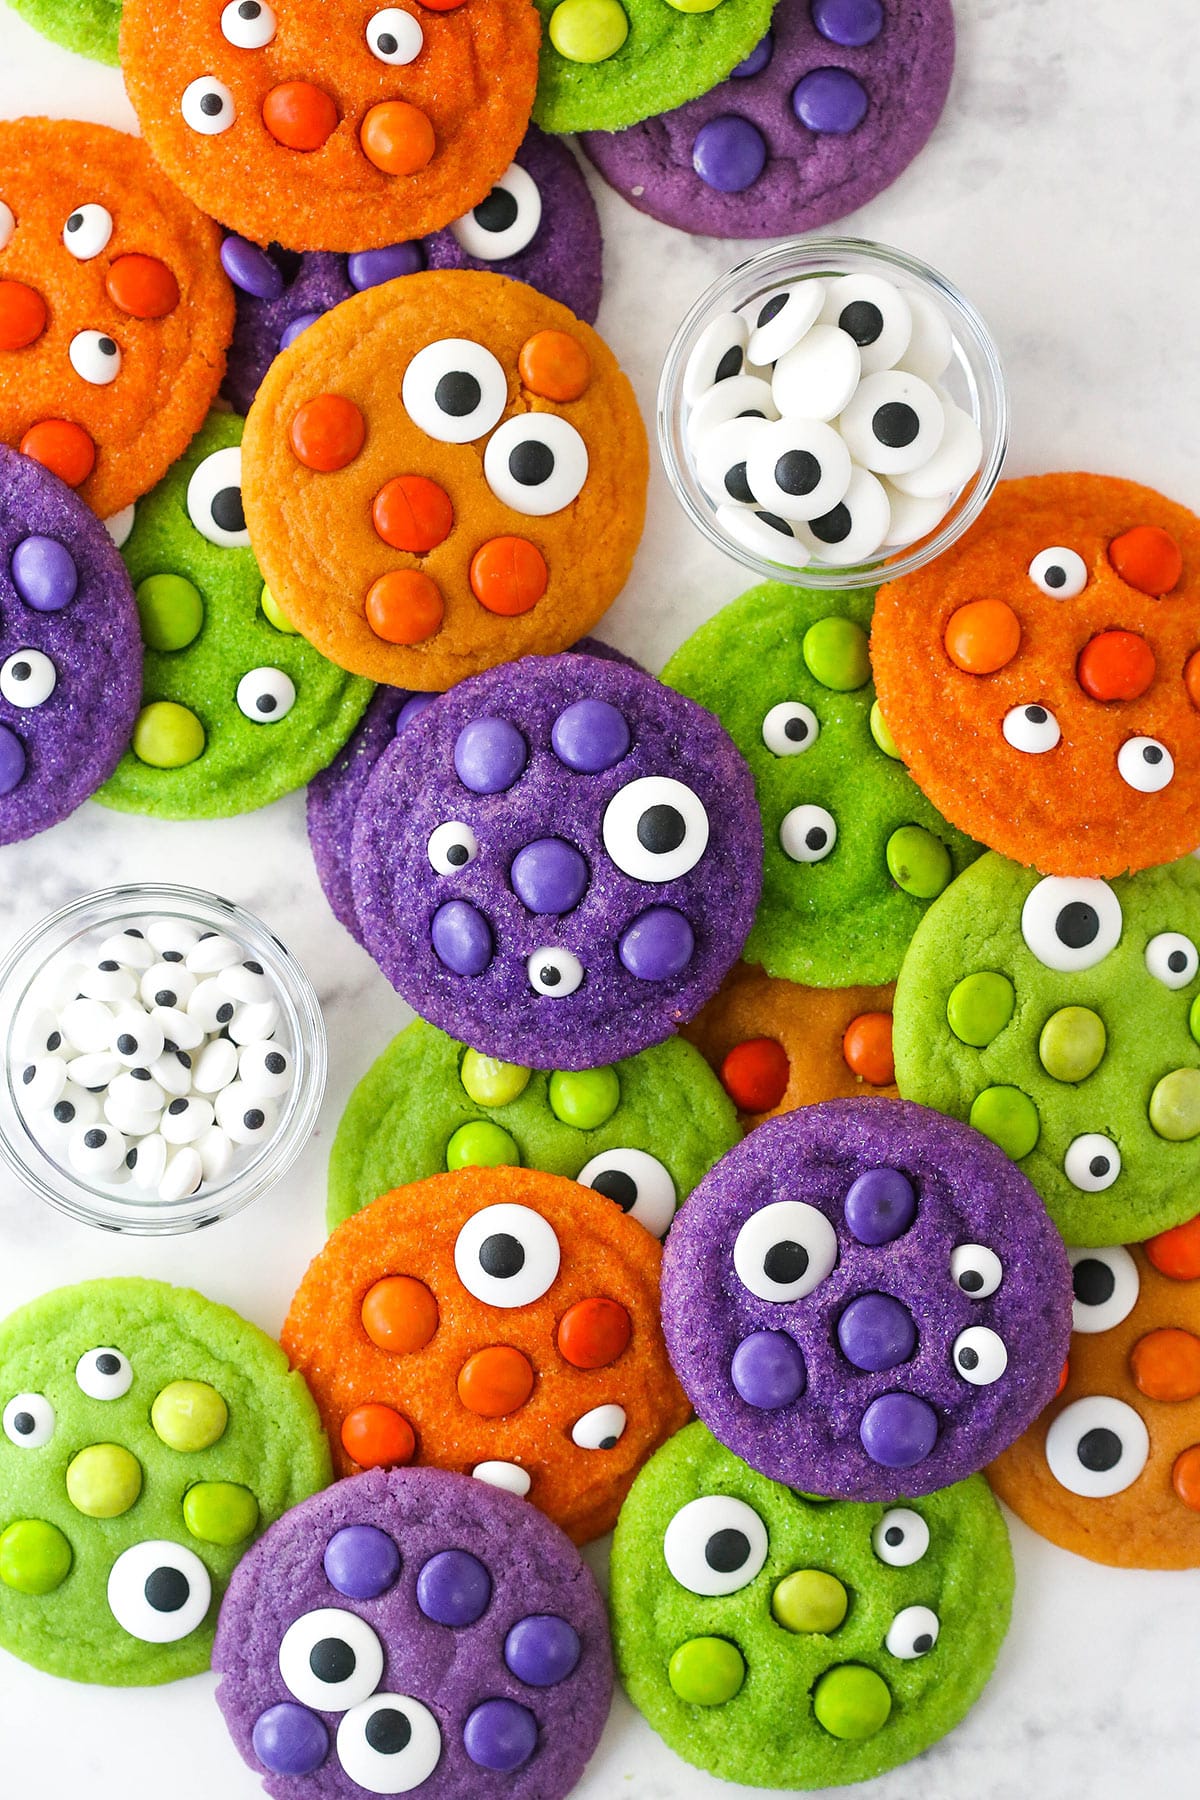 Top view of a pile of brightly colored Halloween Monster Cookies on marble table with eyeballs.